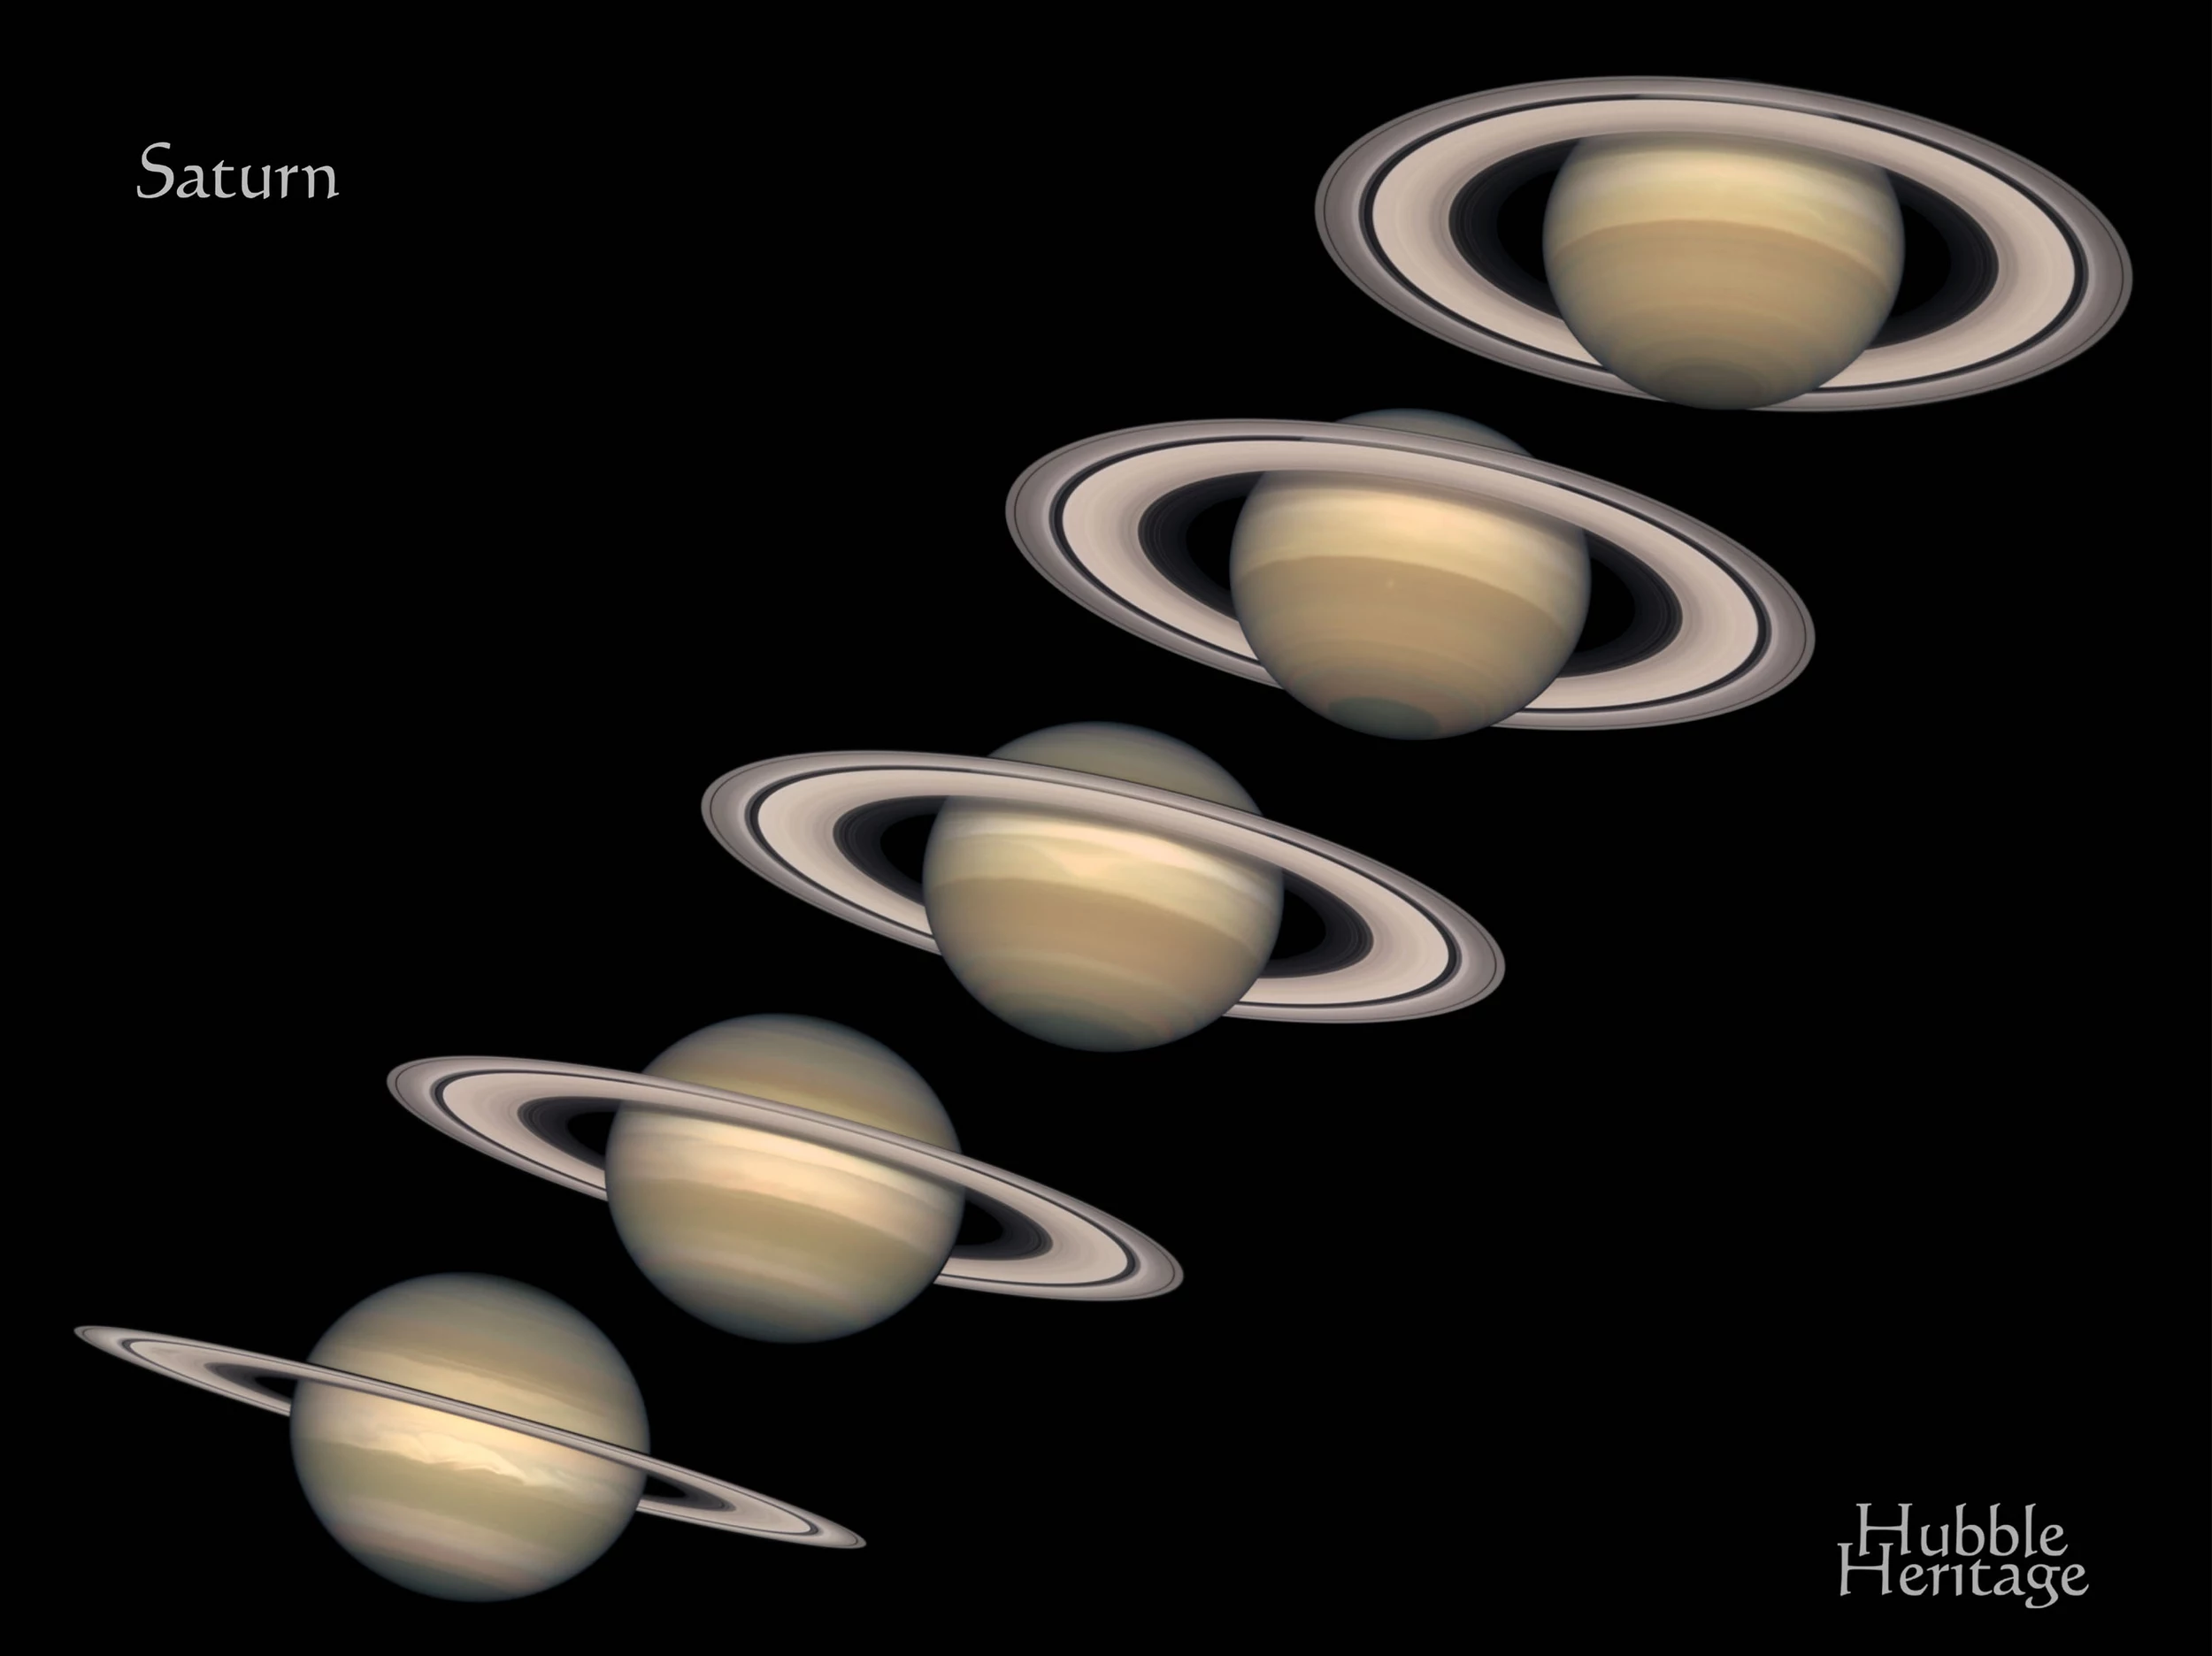 What Would Our View From Earth Look Like If We Had Rings Like Saturn?